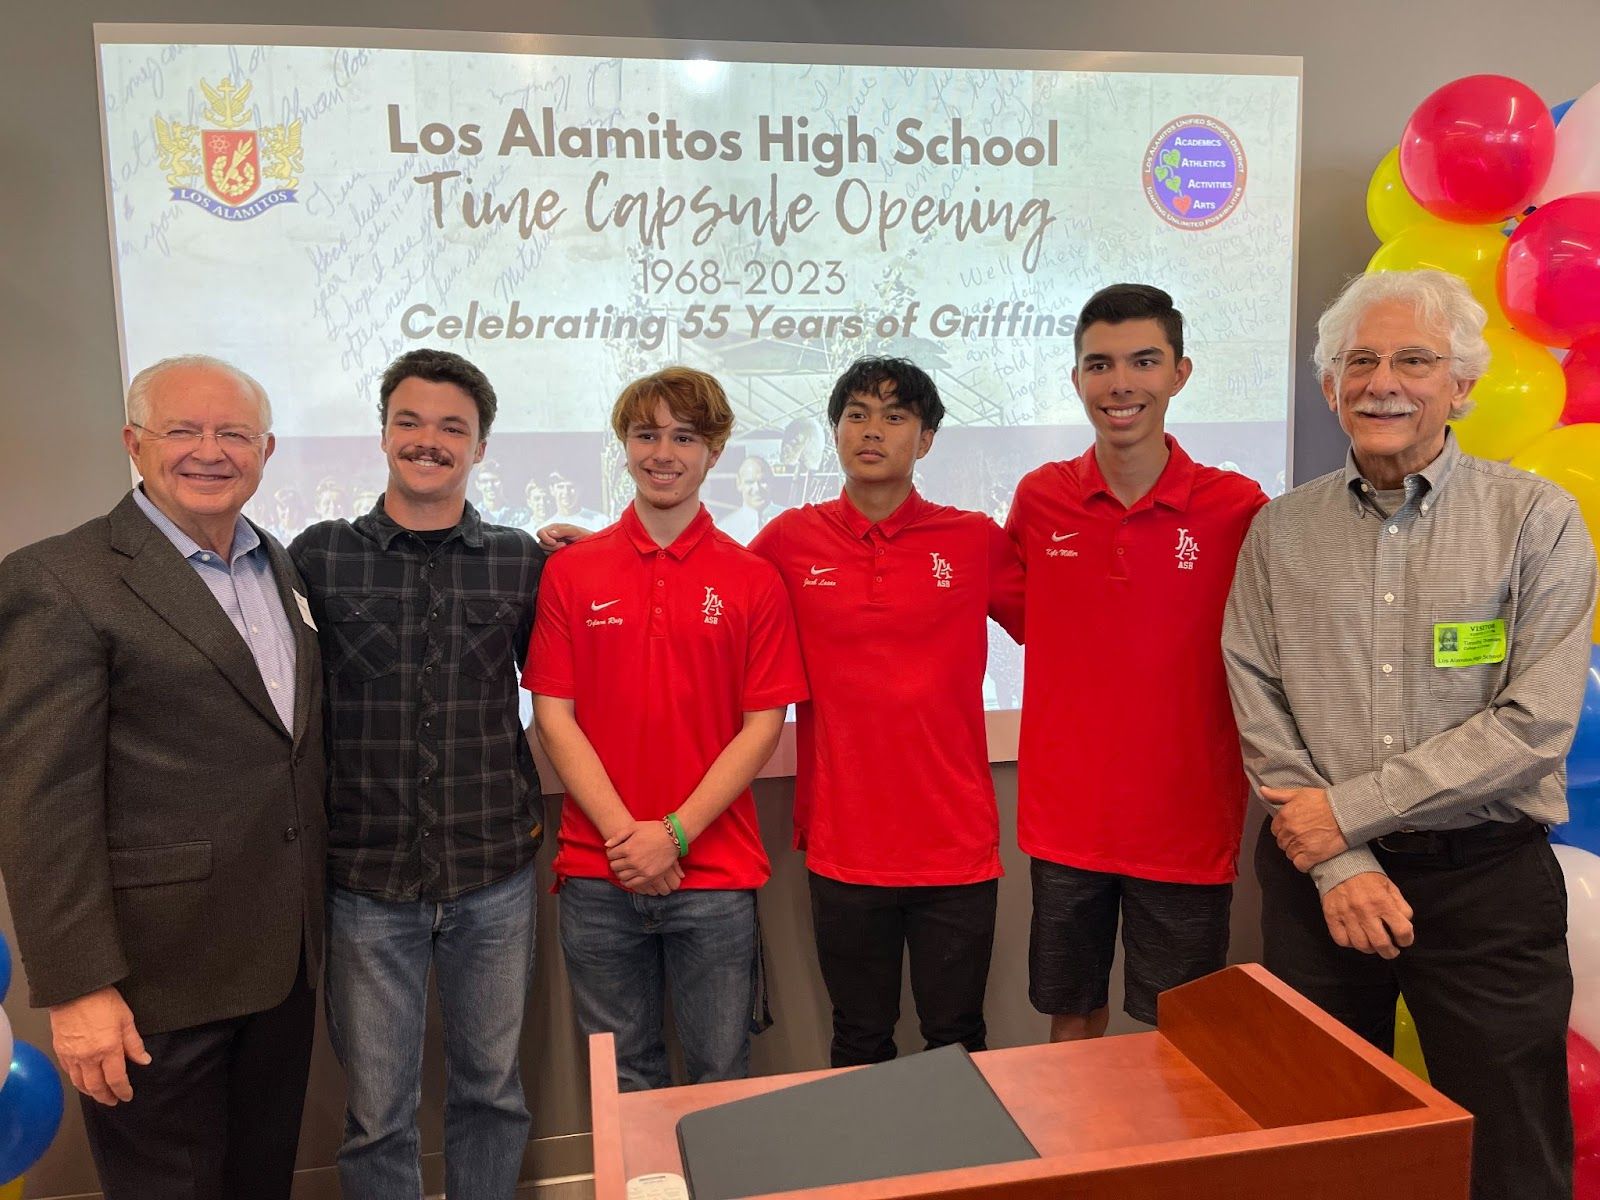 Griffins of the past met Griffins of today during the time capsule unveiling. Pictured from left to right: Richard Herzberg, LAHS ASB President from 1968-1970, current Griffins Michael Henderson, Dylann Ruiz, Jacob Lasso, and Kyle Miller and Tim Thomas, LAHS ASB Senior Class President from 1970. Photo by David N. Young.